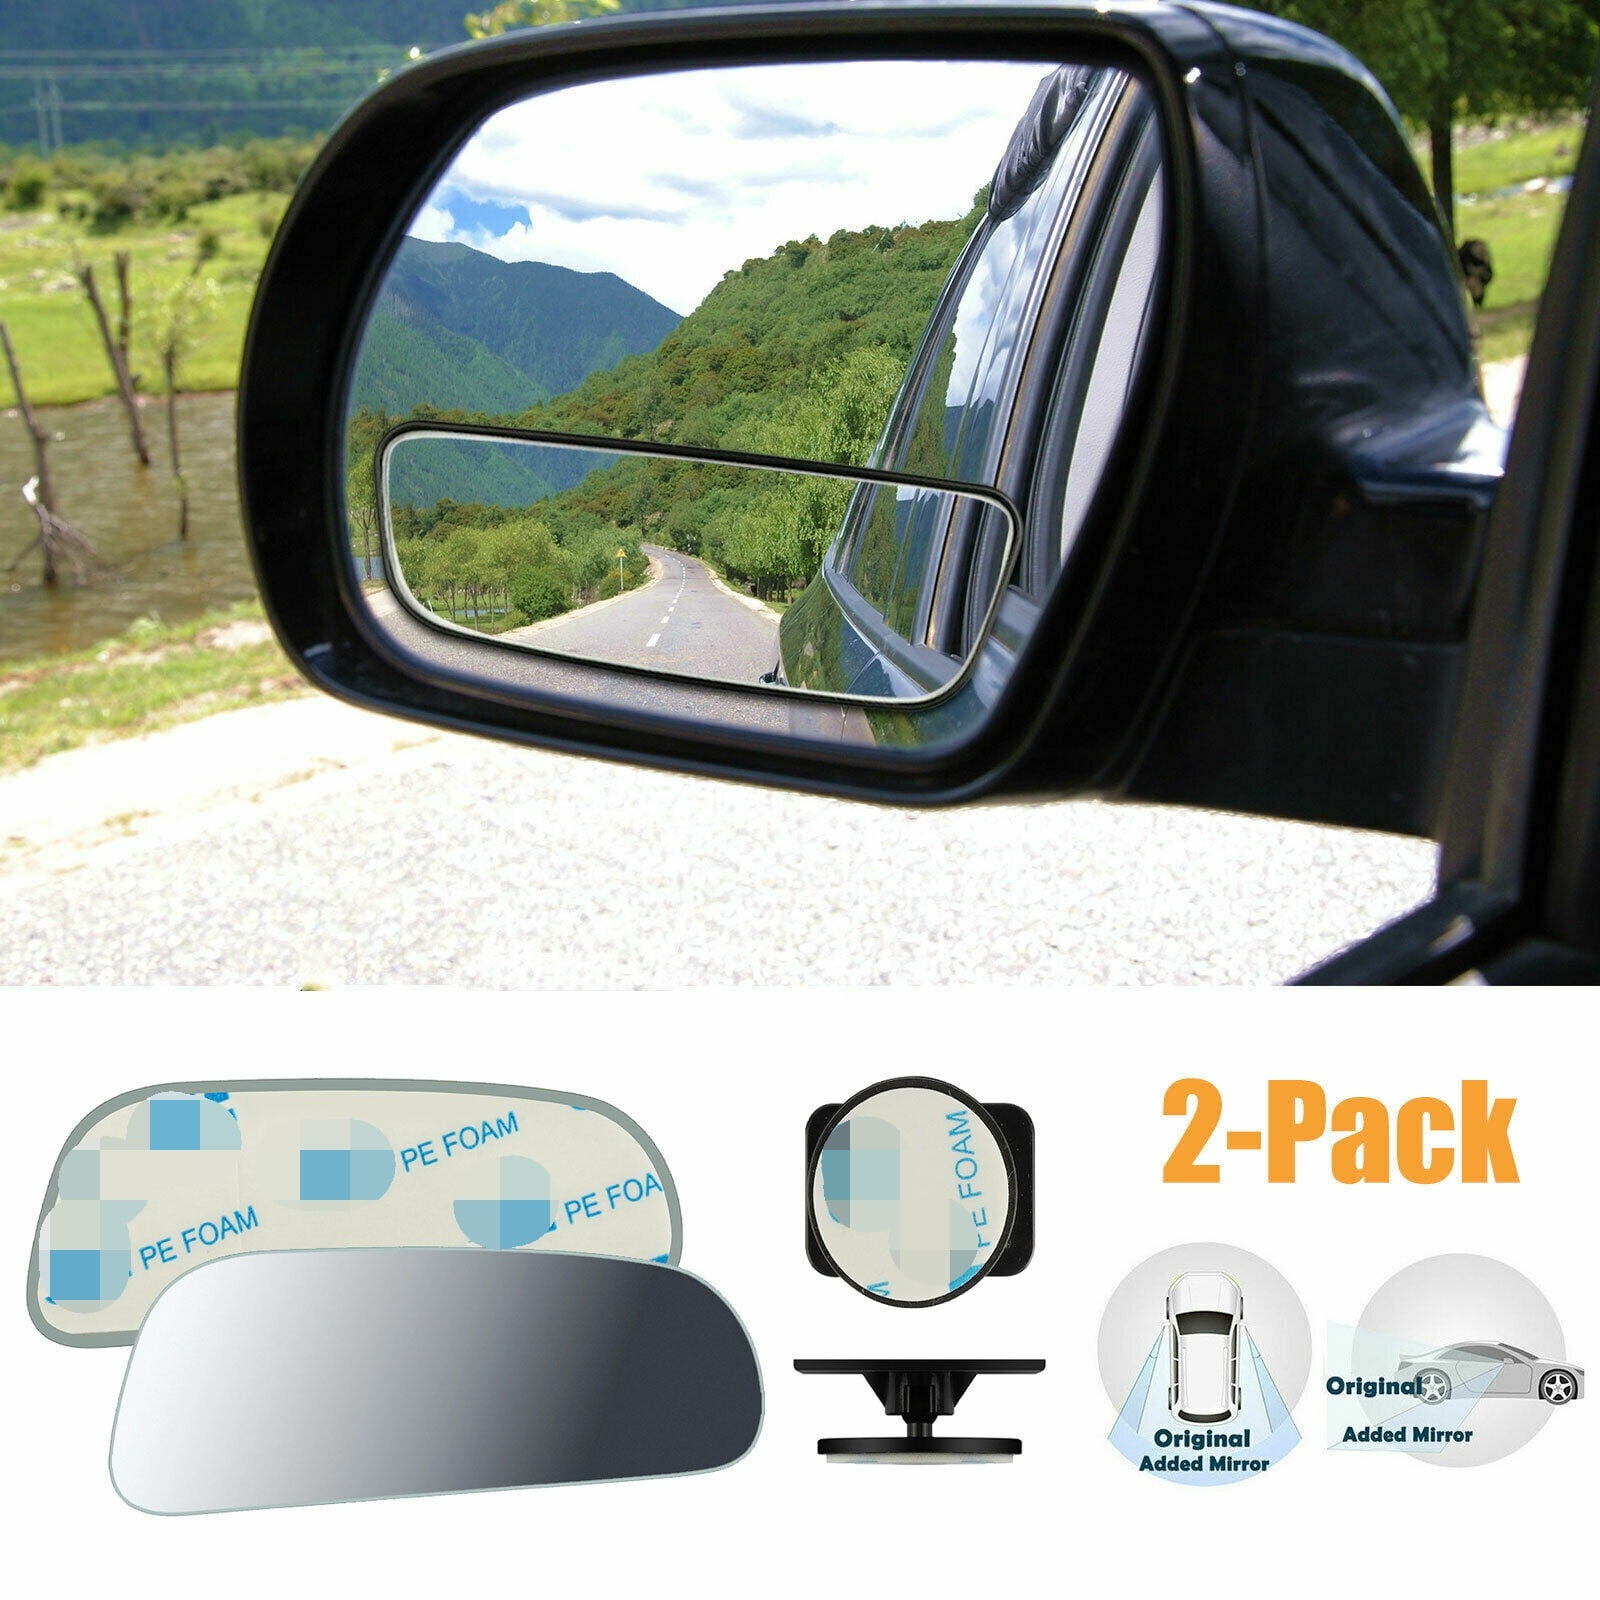 Rear View Mirror Car Suction Mirror Black Small View Mirror Safety Flexible Universal for Interior Car Rear Viewing 